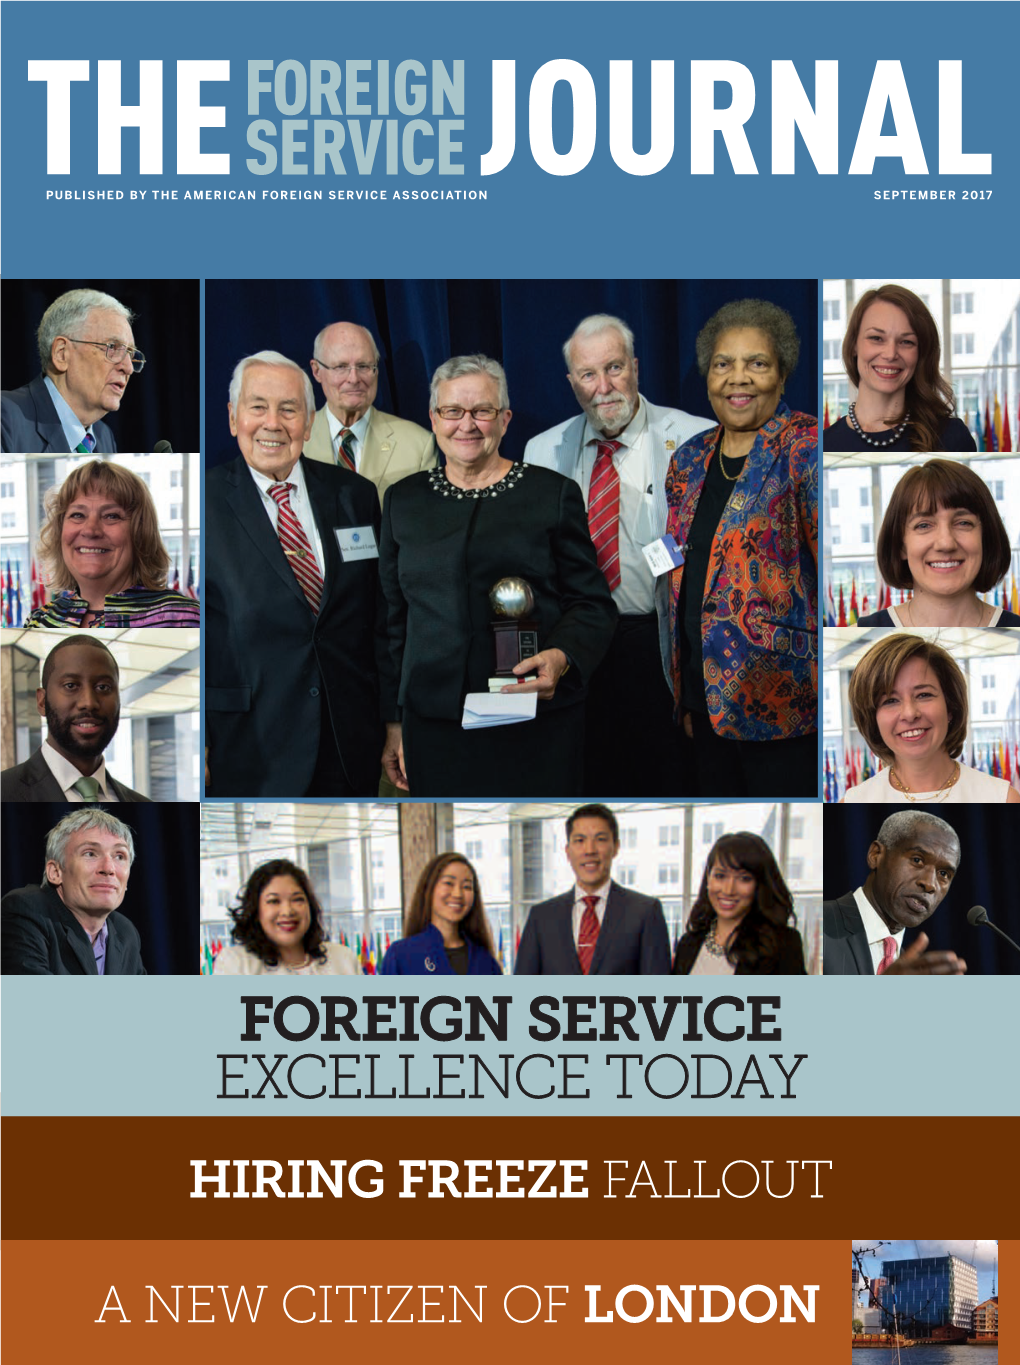 The Foreign Service Journal, September 2017